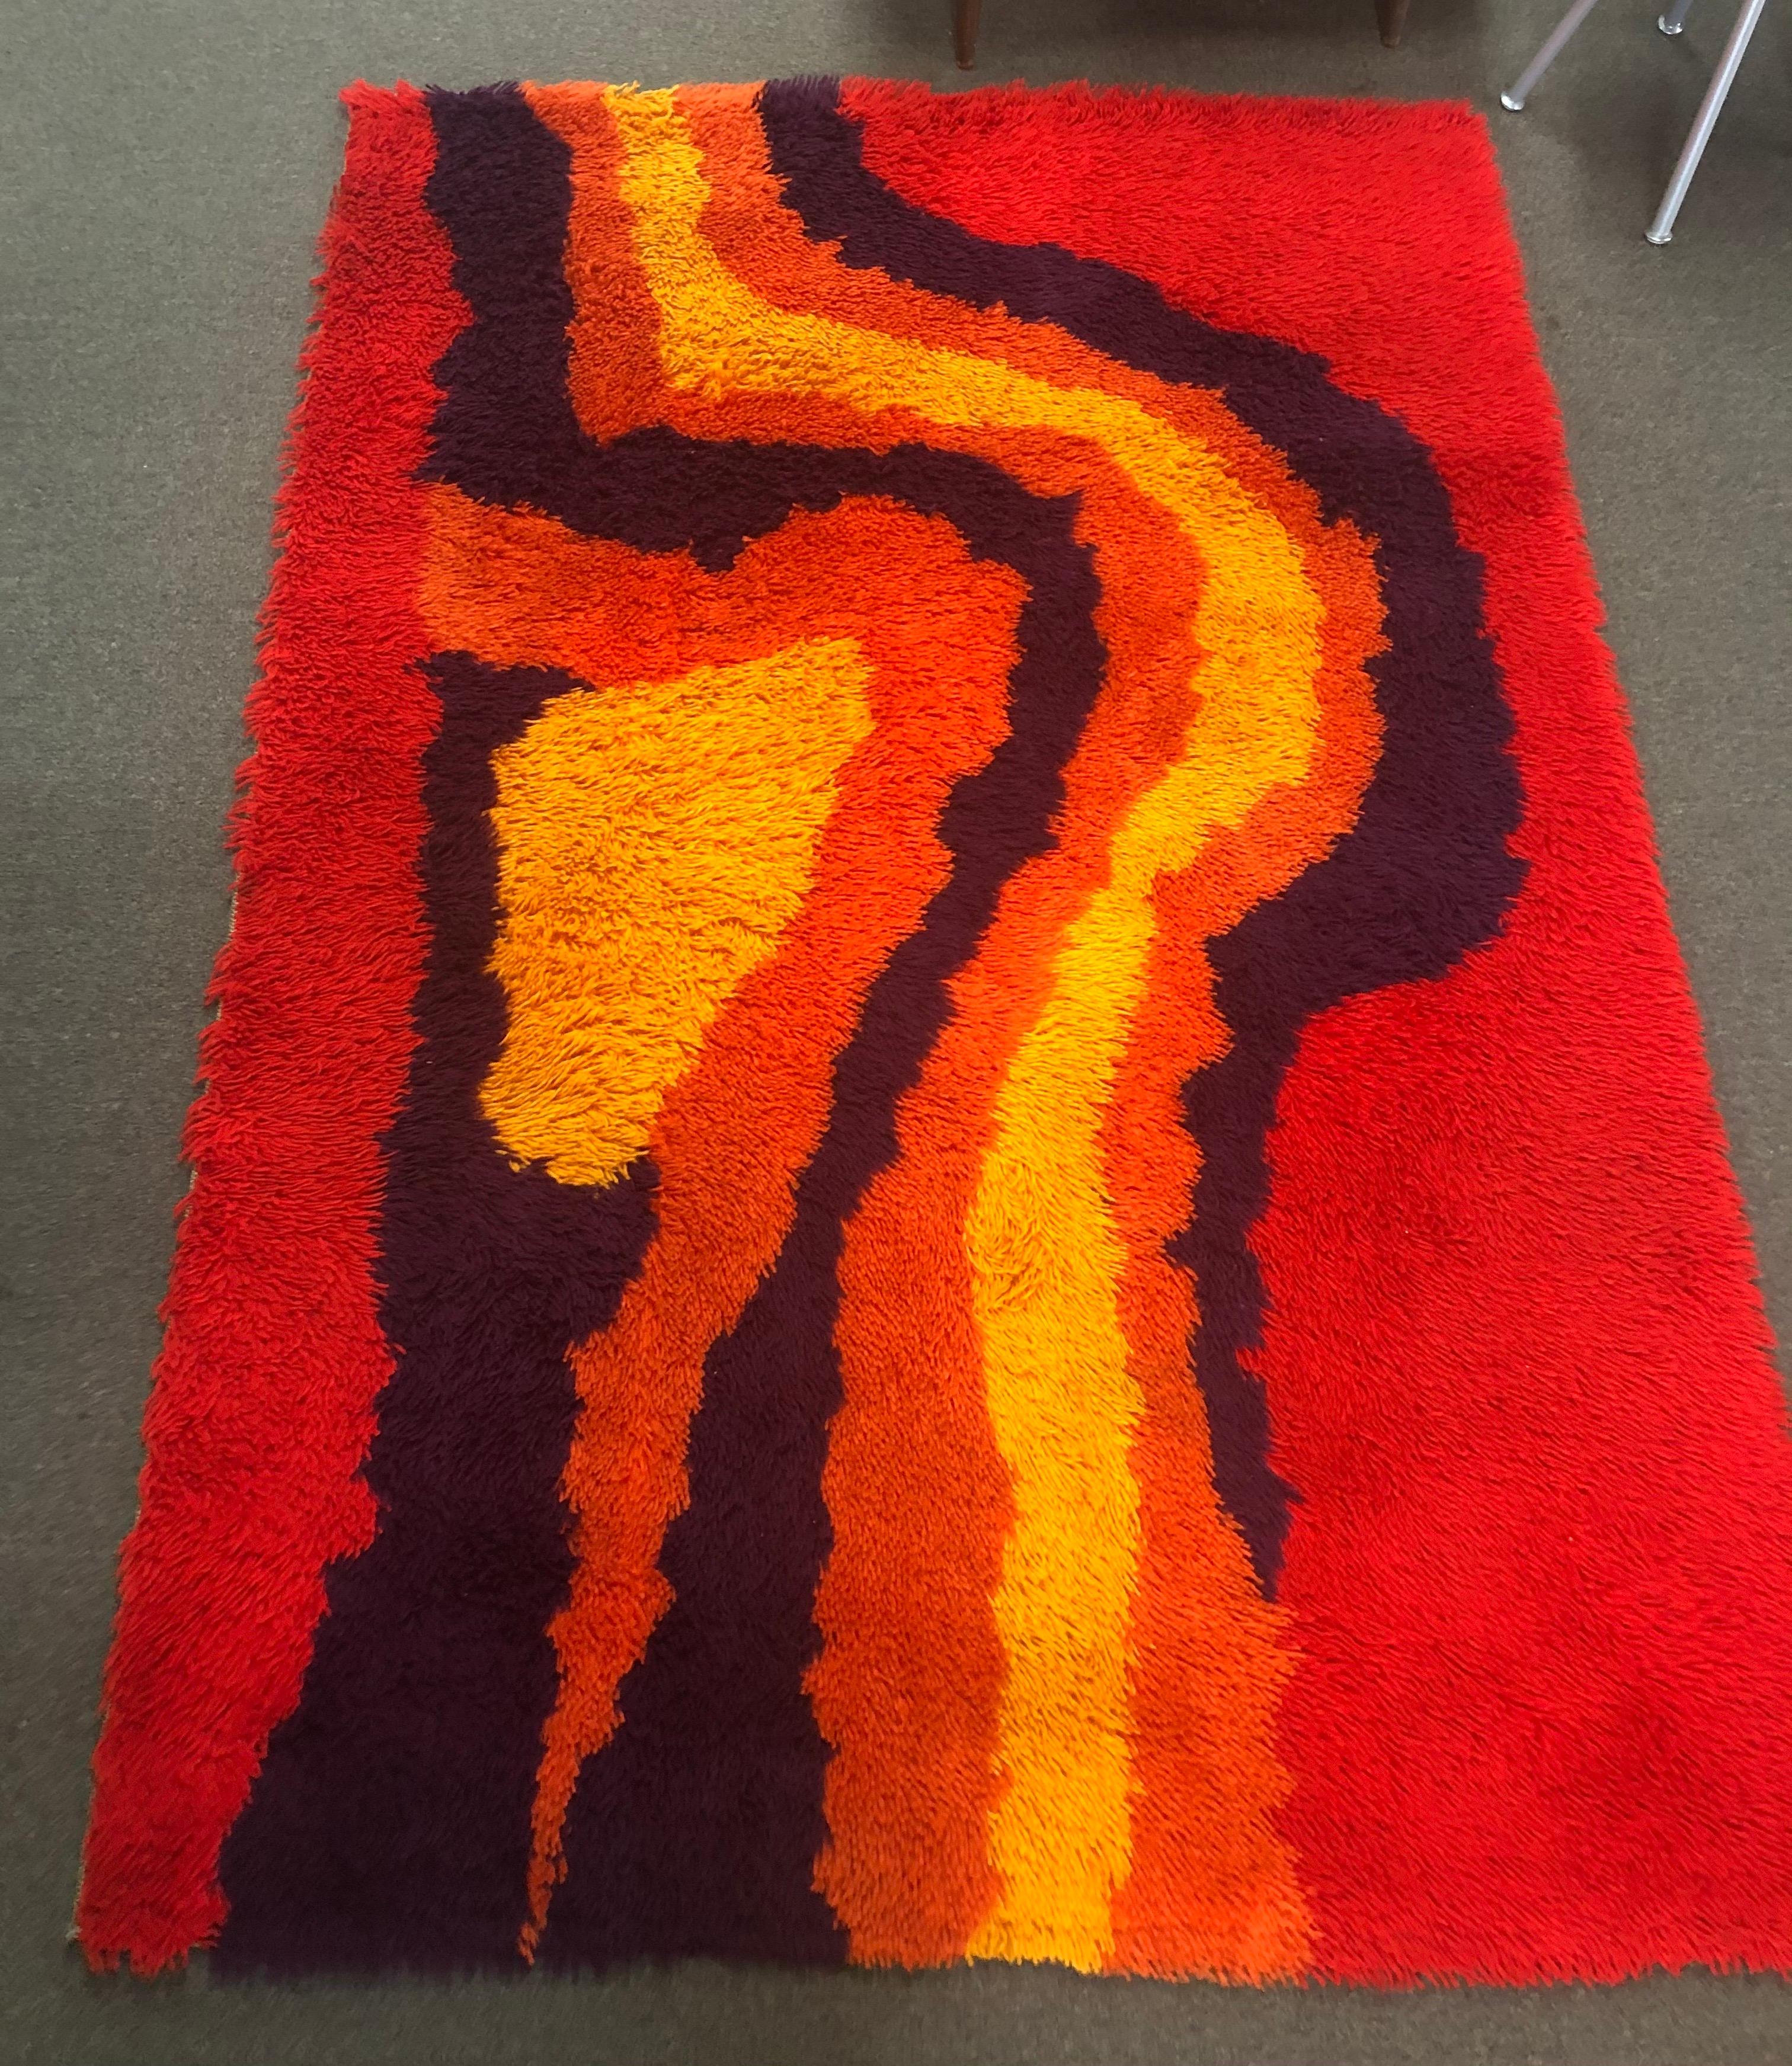 A very cool midcentury shag Rya rug from Sweden, circa 1970s. The wool rug is in very good vintage condition and has bright, vibrant colors (red, orange, yellow, purple and brown). It measures 54